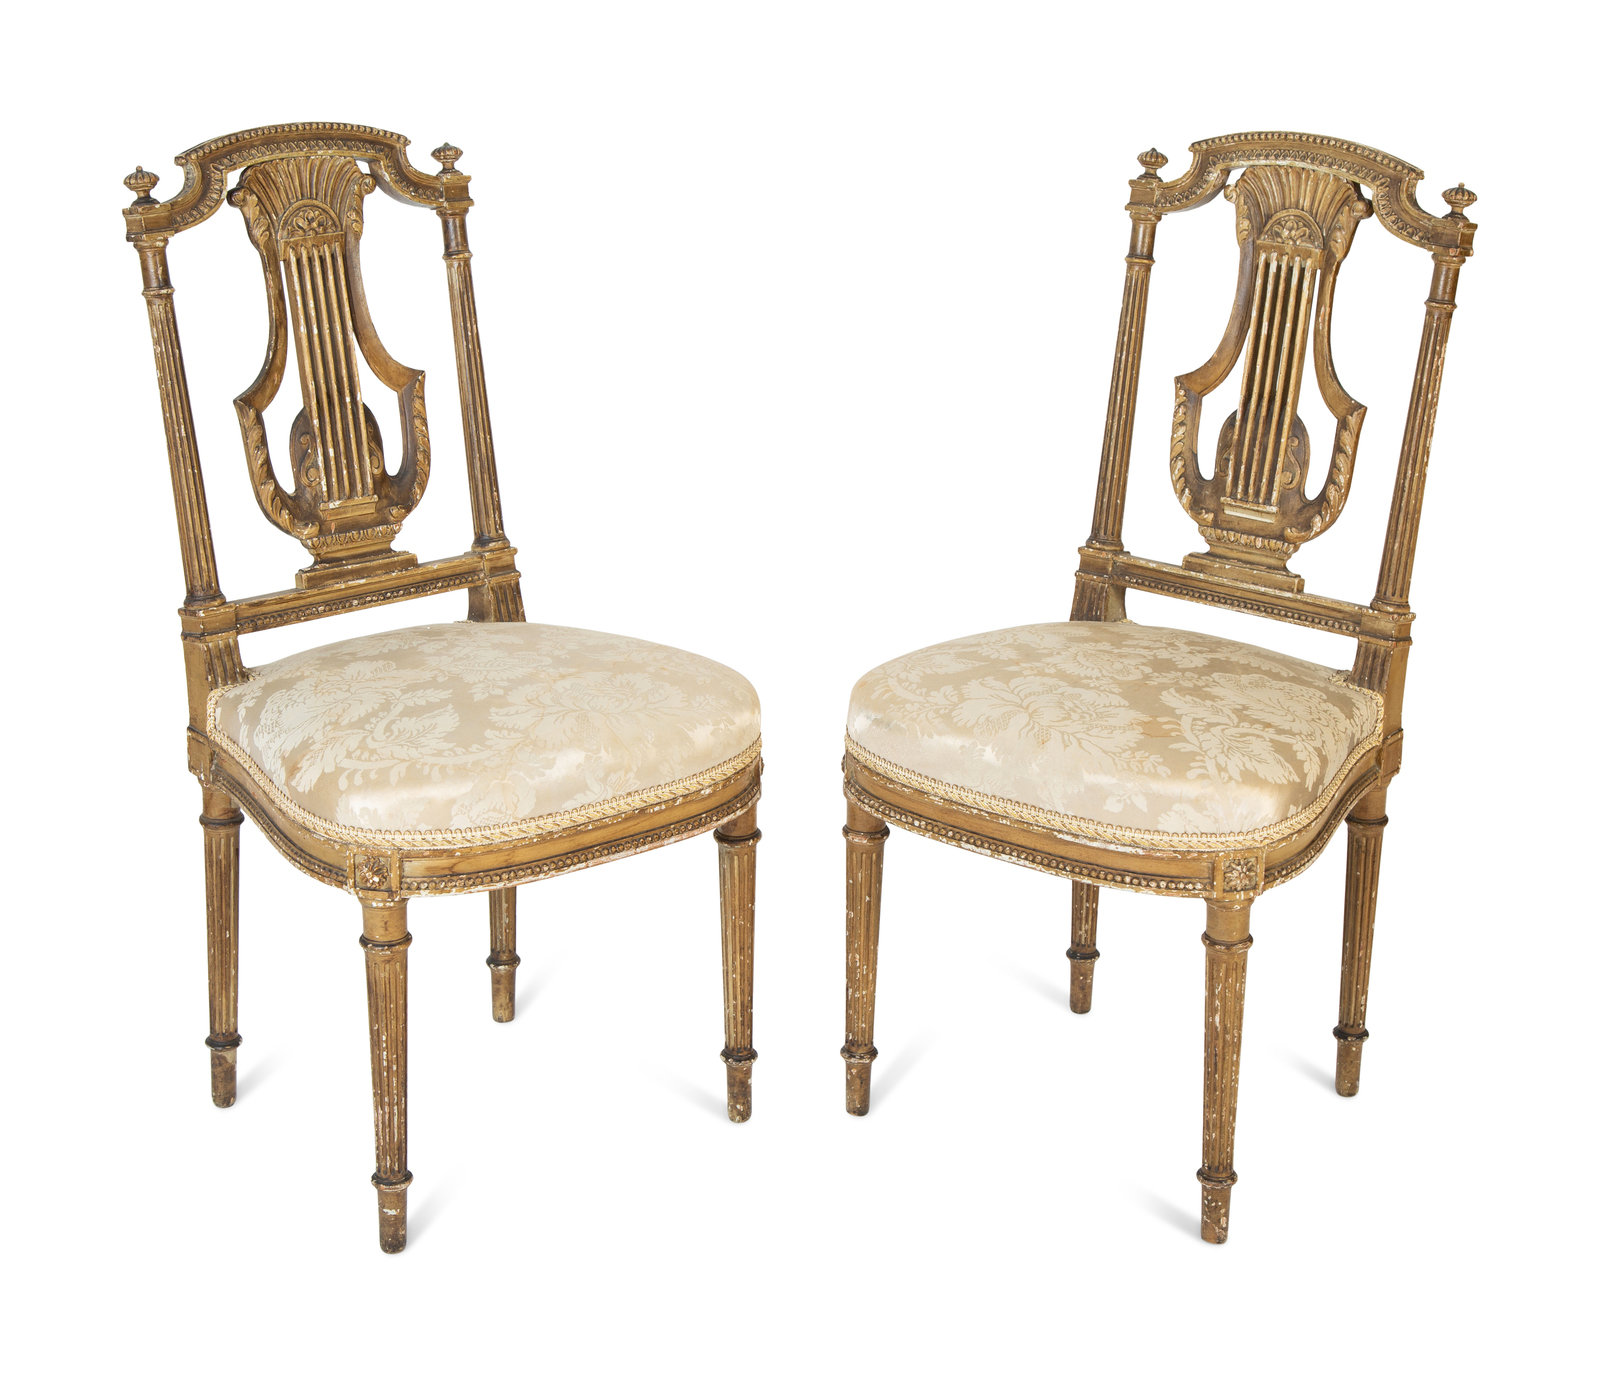 Suite of five Louis XVI period chairs with lyre back - Ref.81402